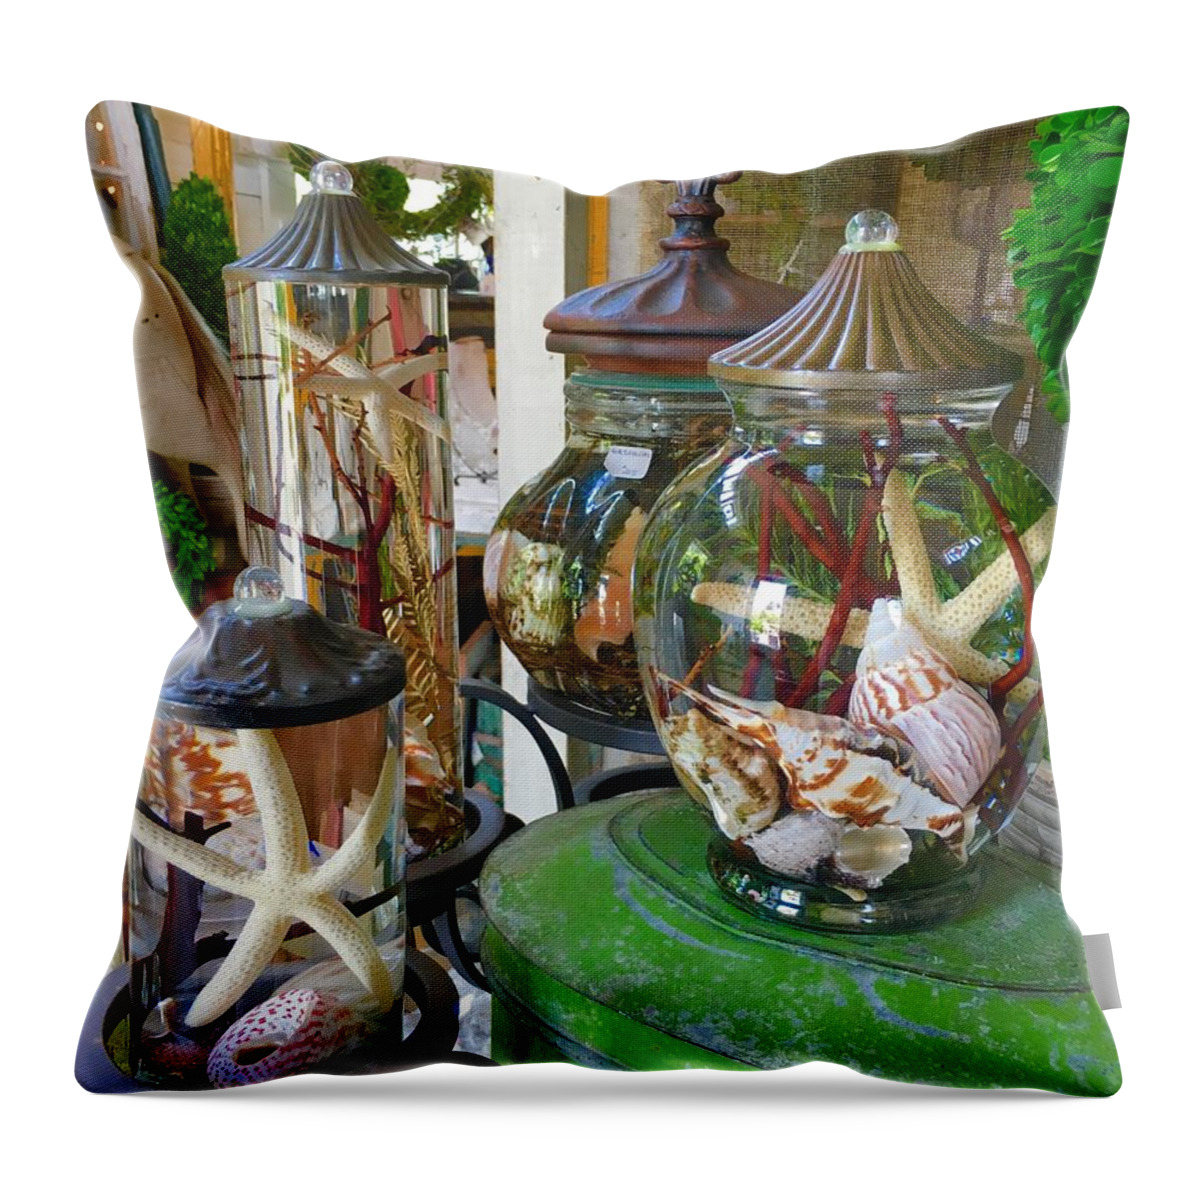  Throw Pillow featuring the photograph Remember New Jersey by Dottie Visker